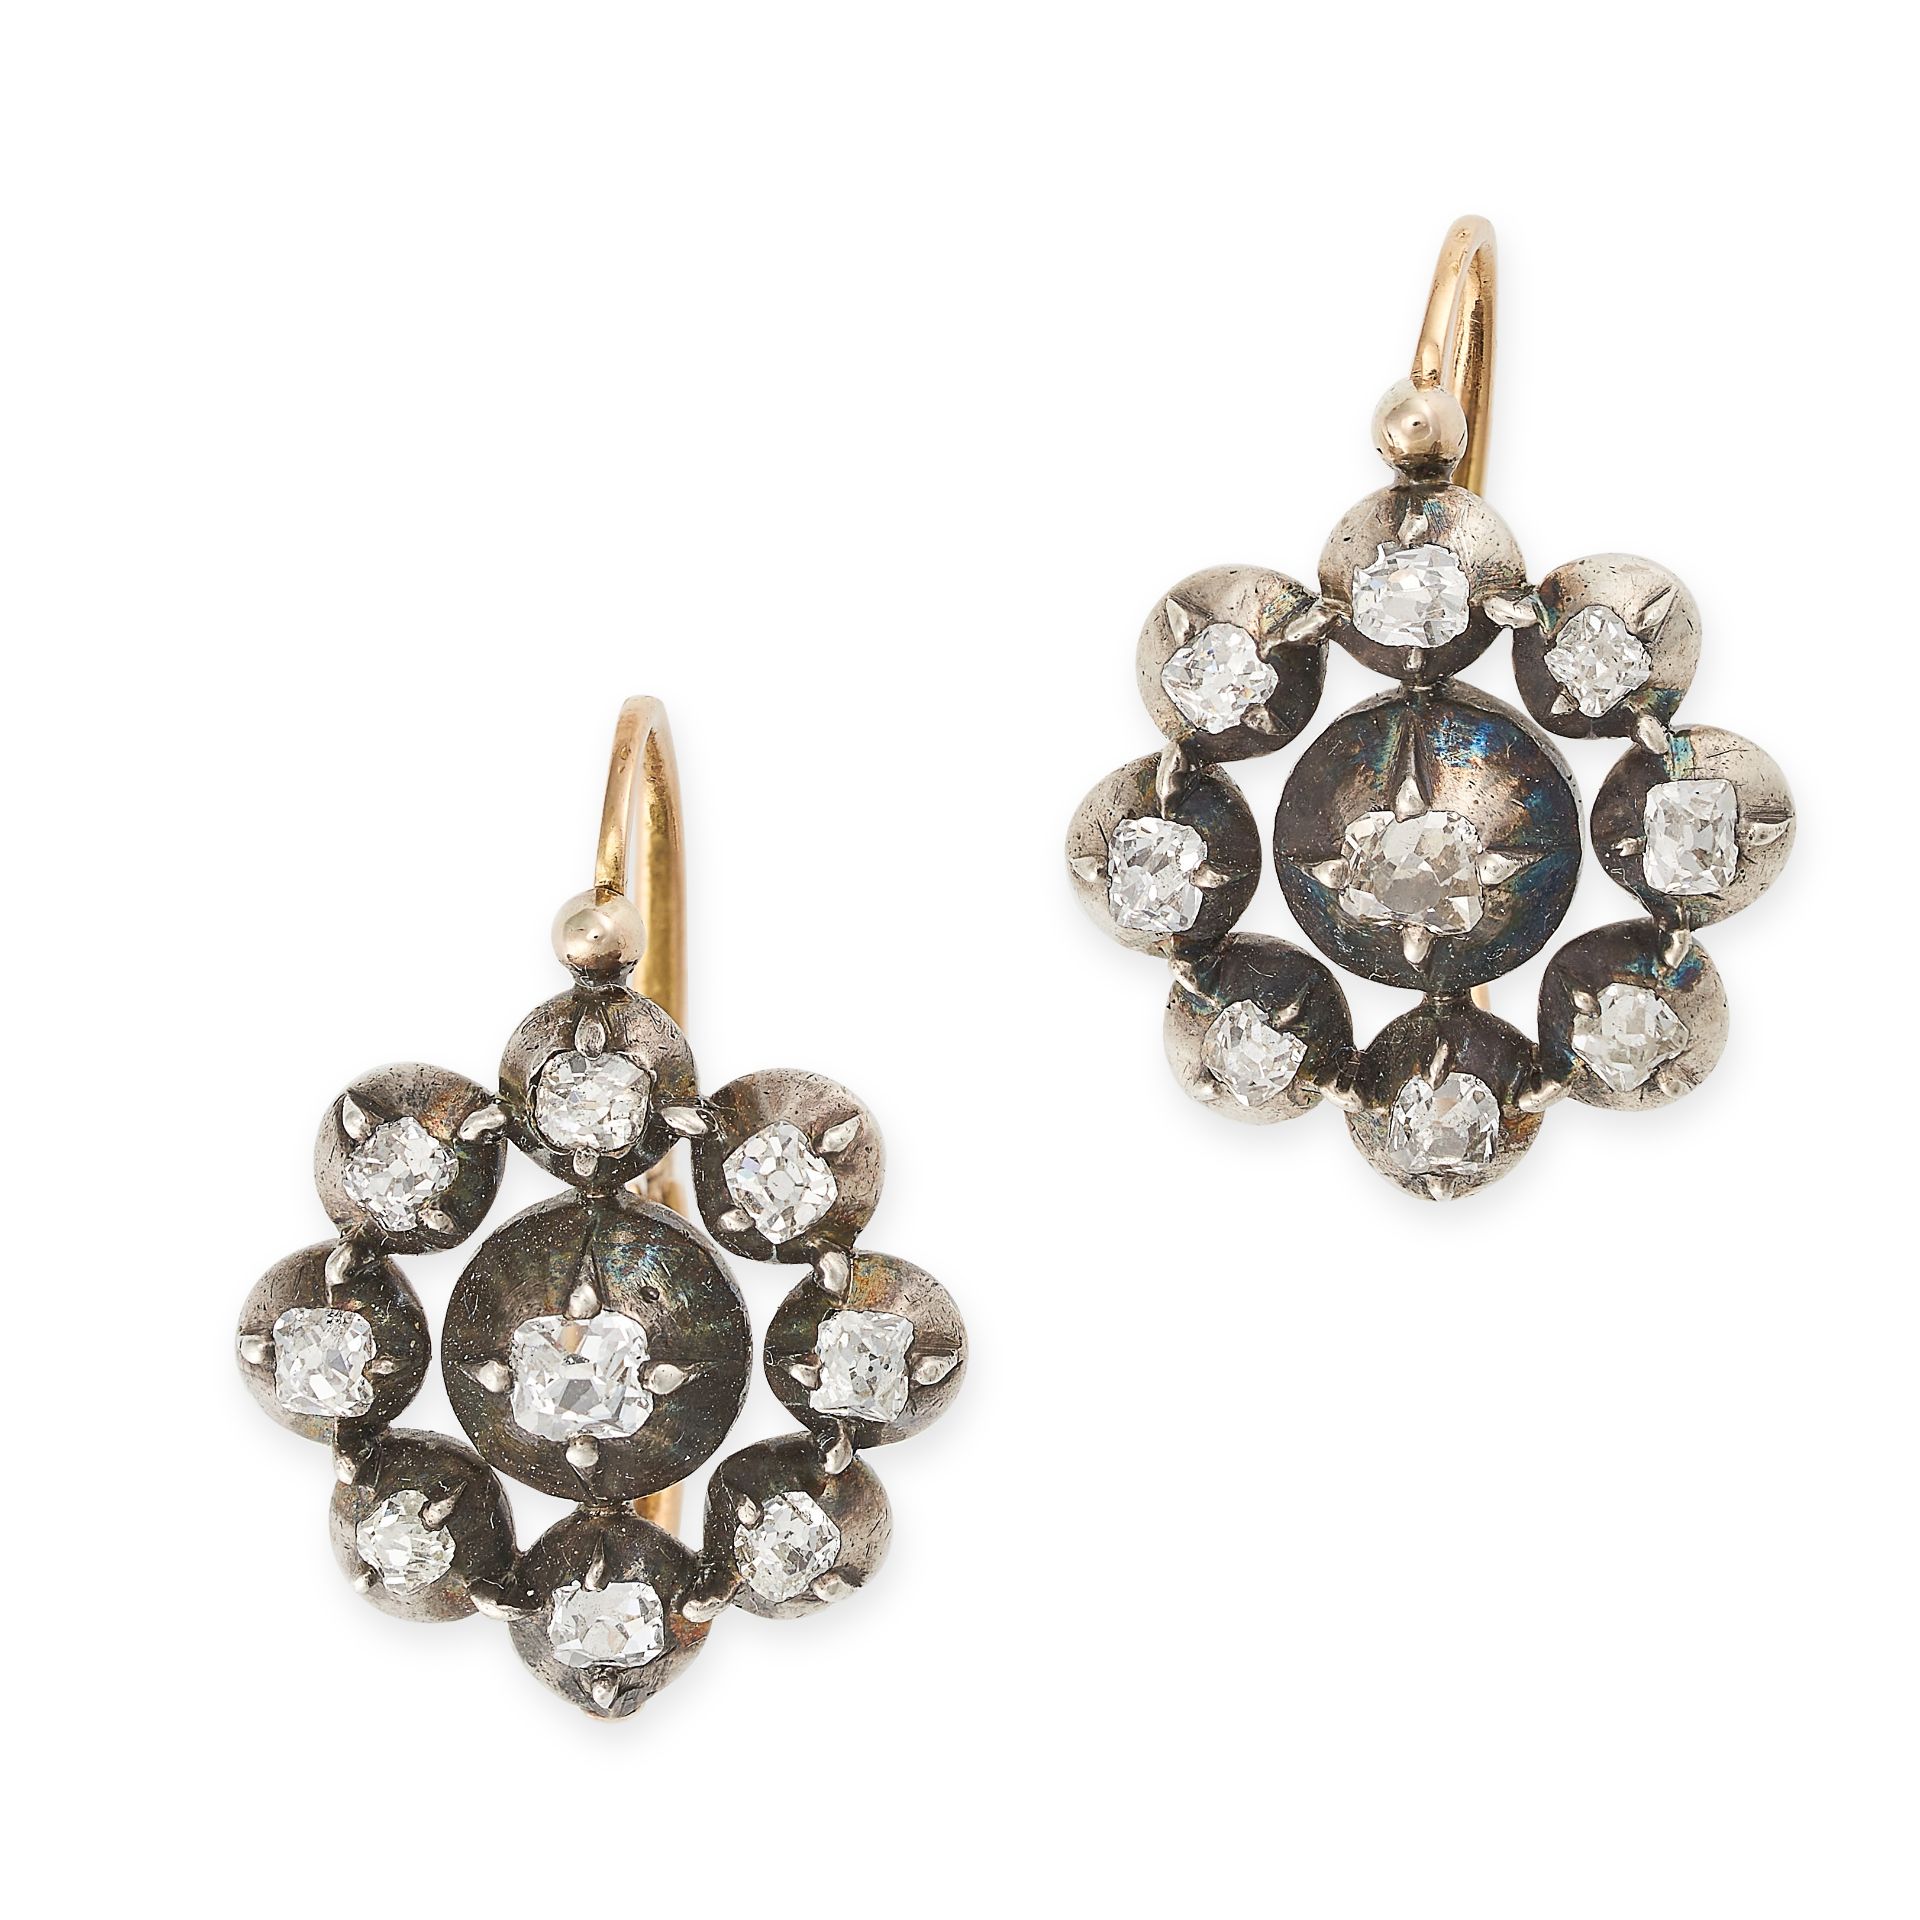 A PAIR OF ANTIQUE DIAMOND CLUSTER EARRINGS, 19TH CENTURY AND LATER in yellow gold and silver, eac...